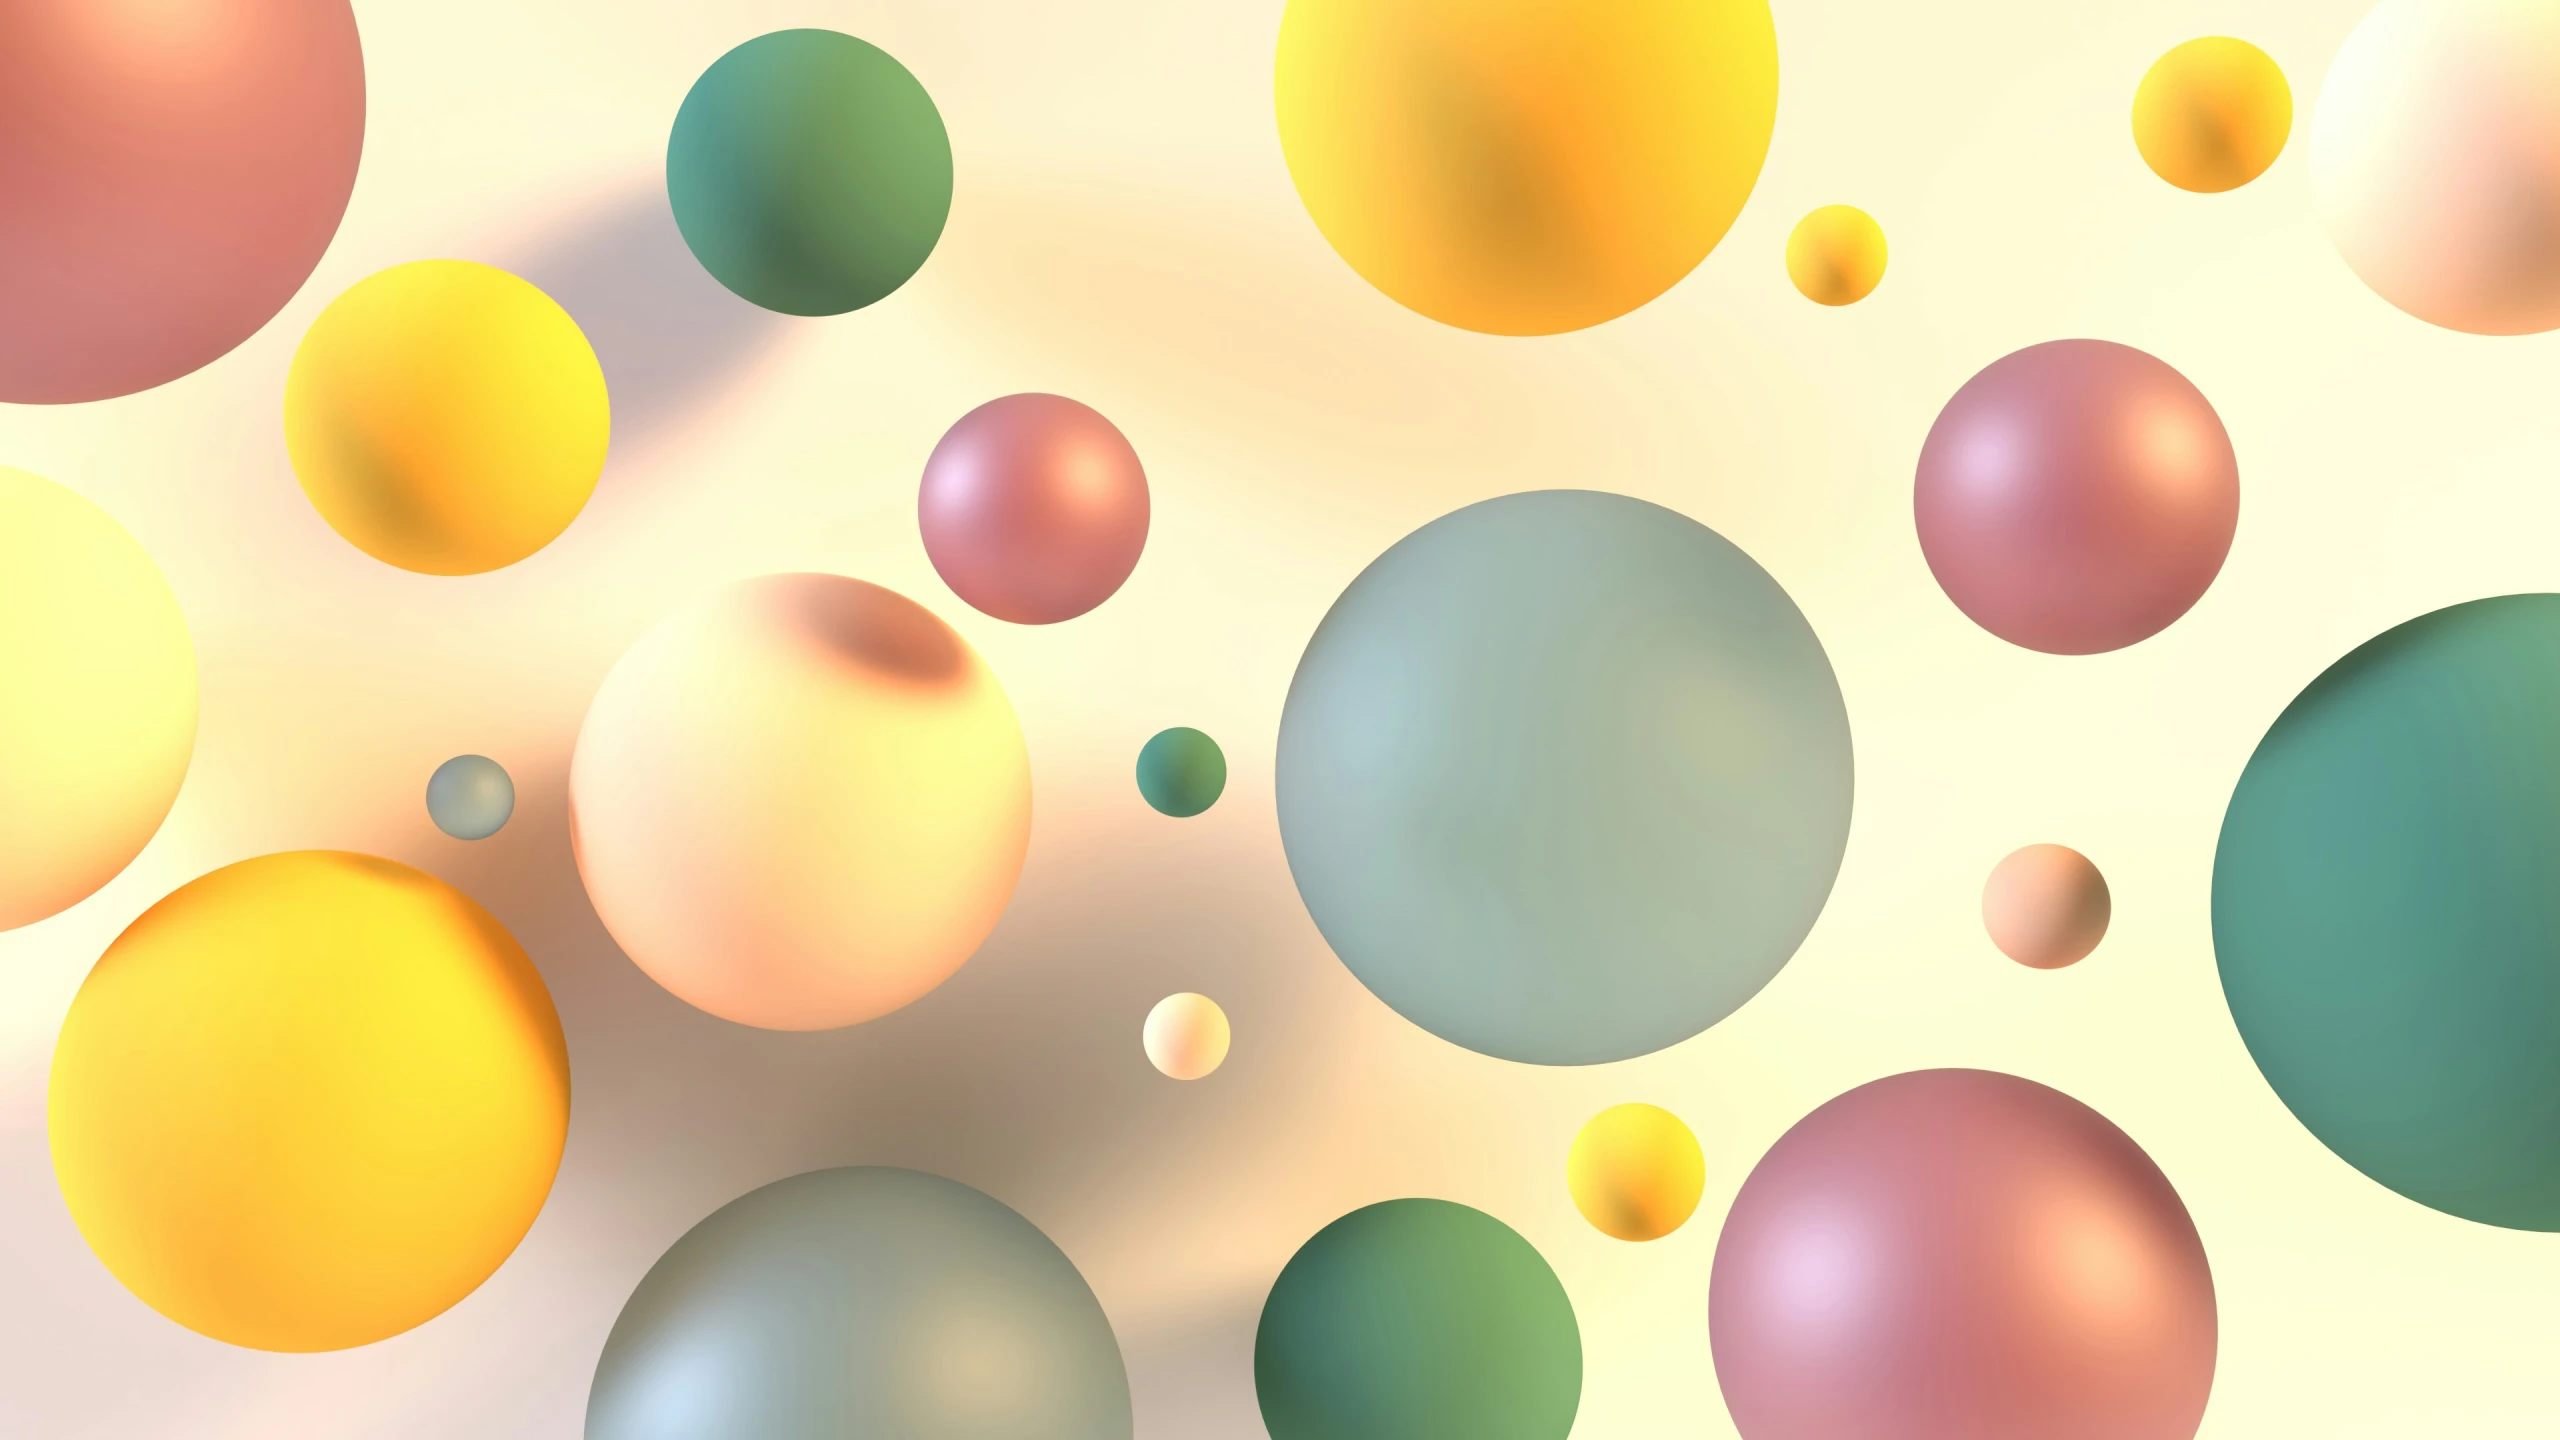 an abstract wallpaper with yellow and green circles